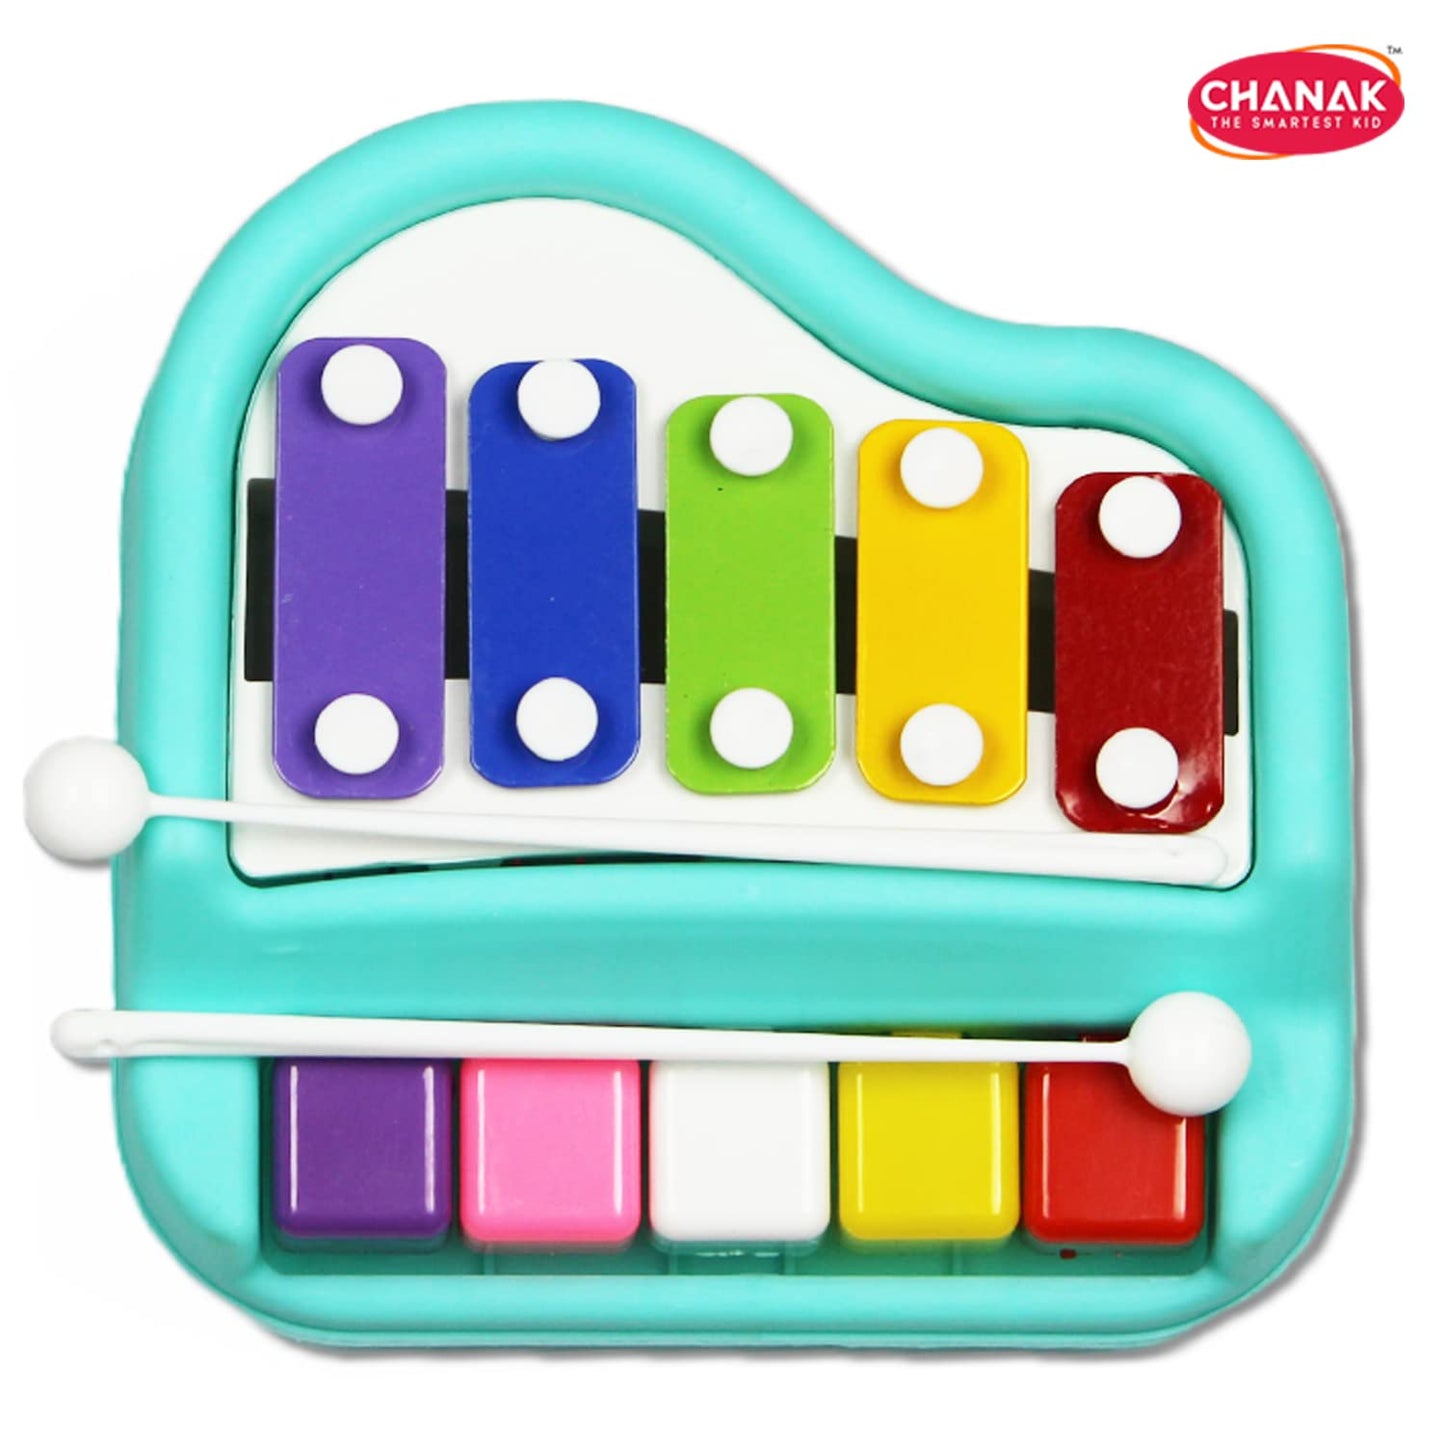 Chanak Musical Xylophone Piano Toy for Kids (Blue)